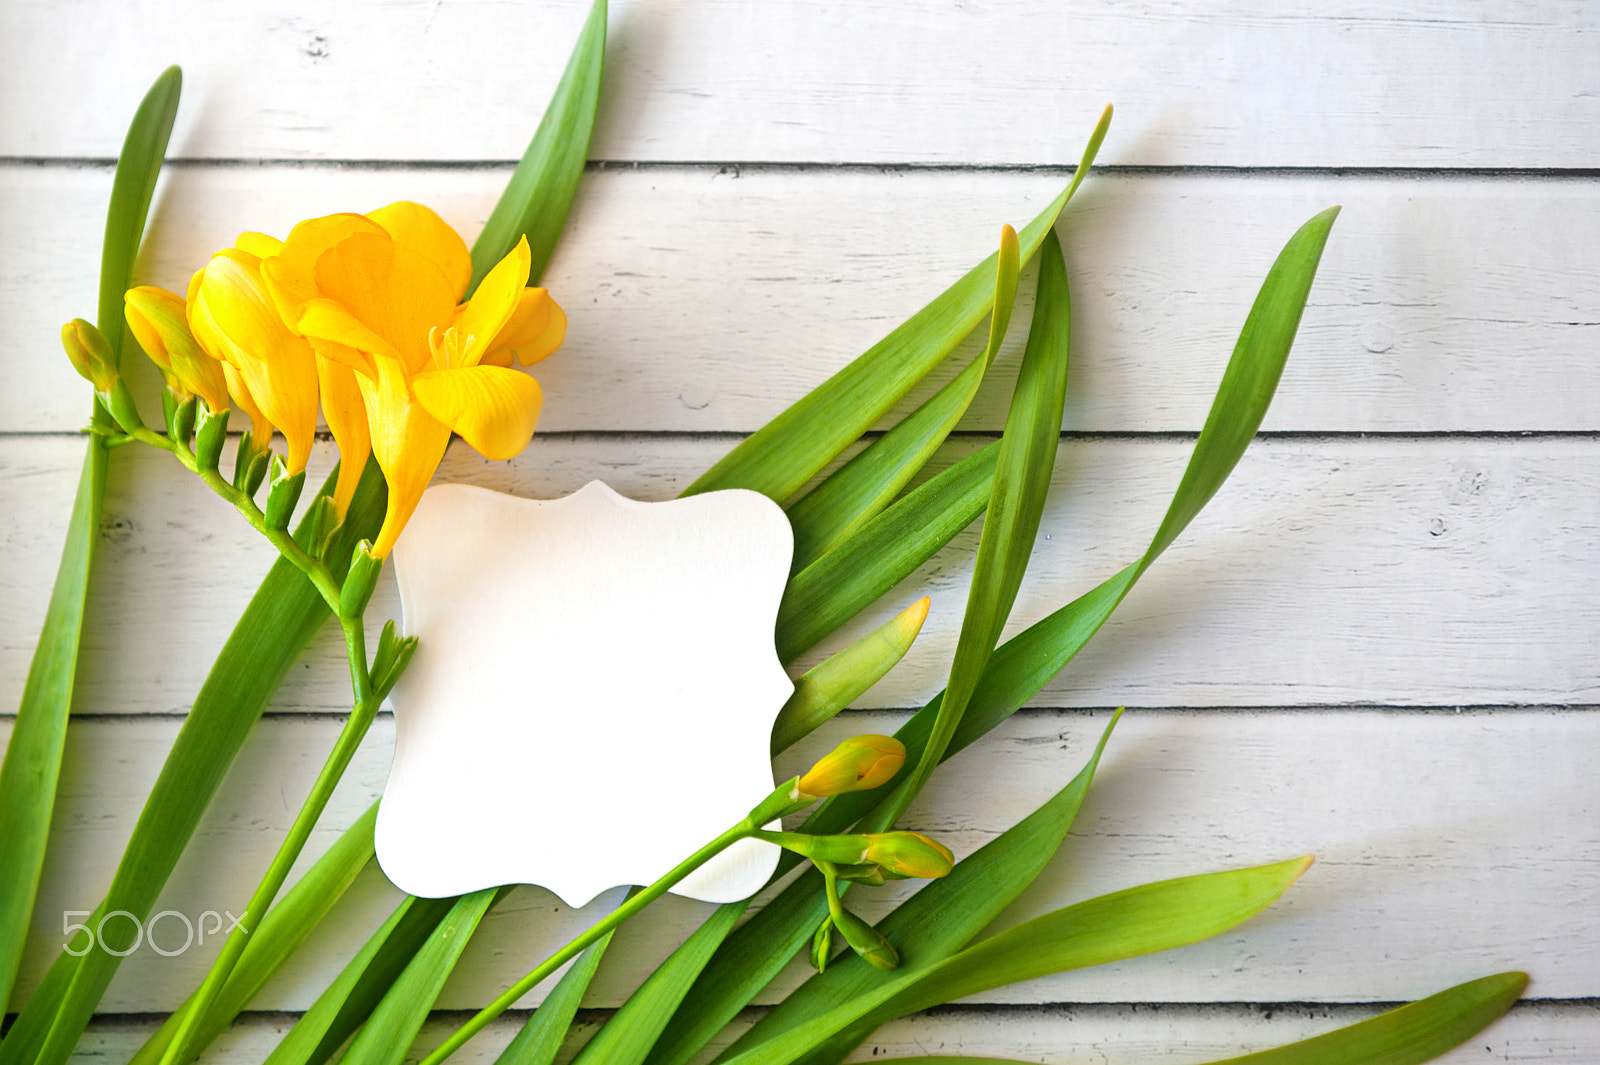 Nikon D700 sample photo. Spring grass and yellow flowers with buds with card on wood background photography